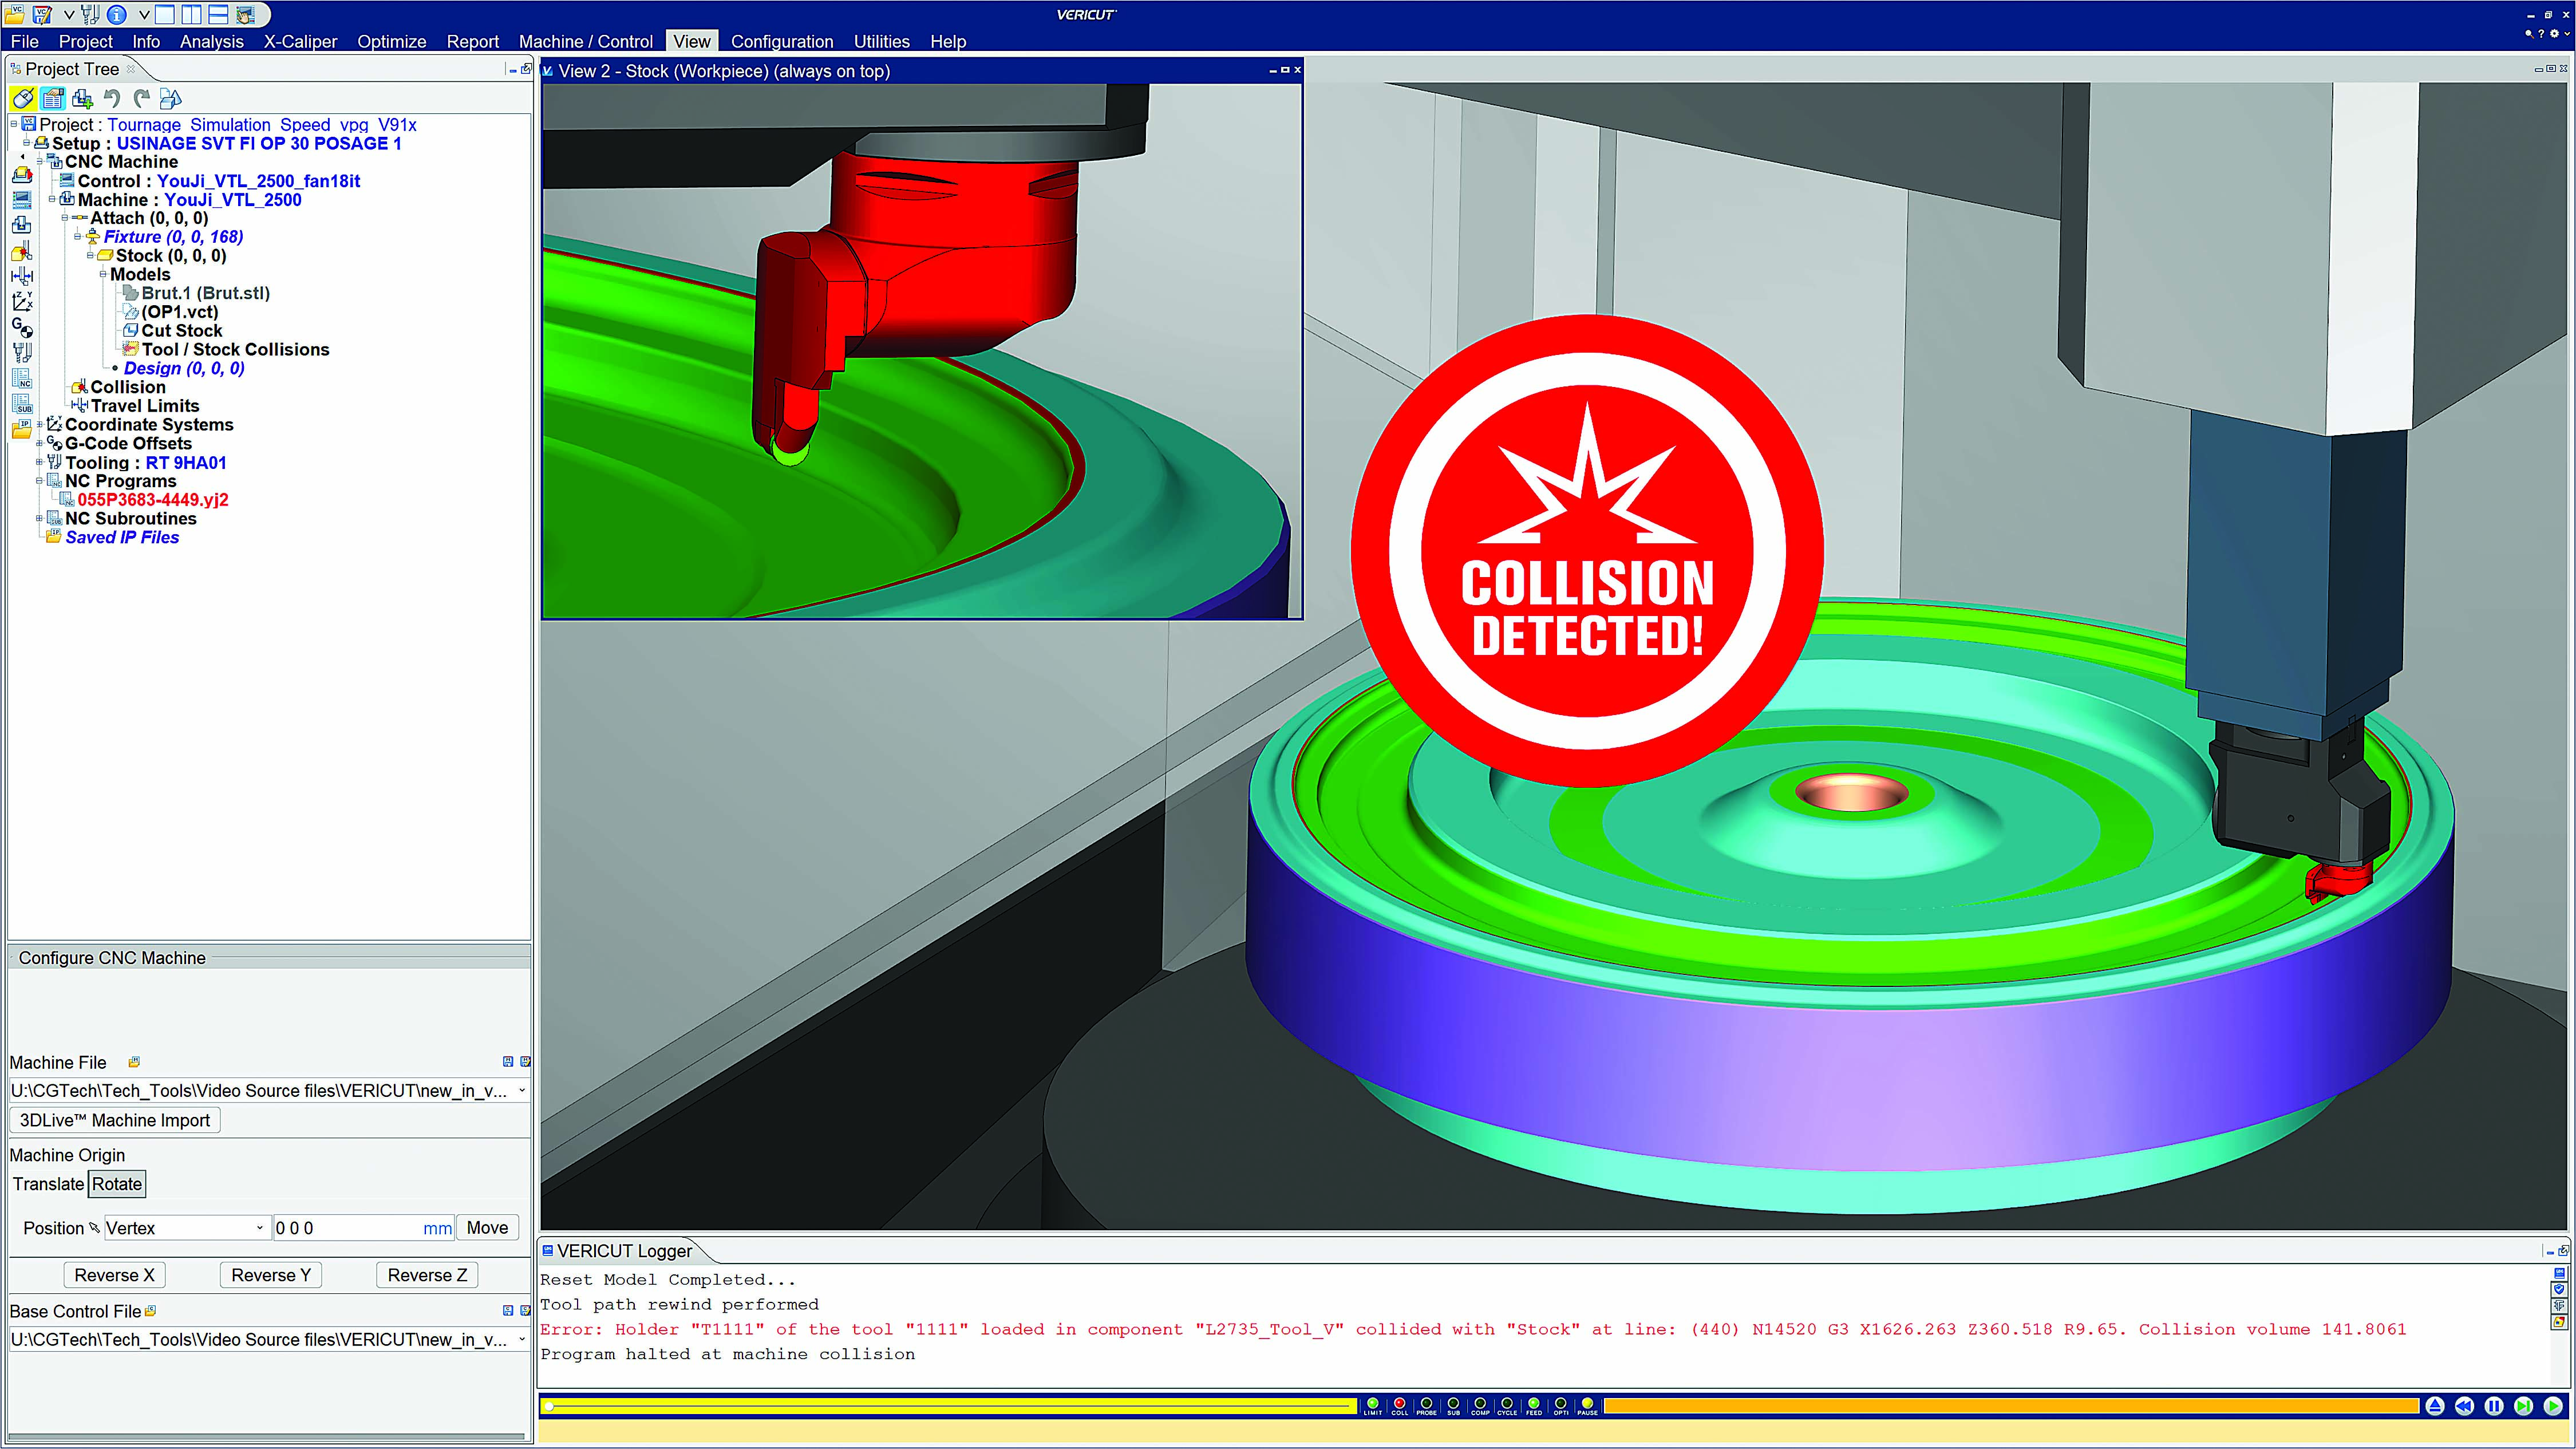 Blum uses Vericut toolpath simulation and optimization software (left) to reduce CNC downtime and catch programming mistakes that might otherwise result in a crash.